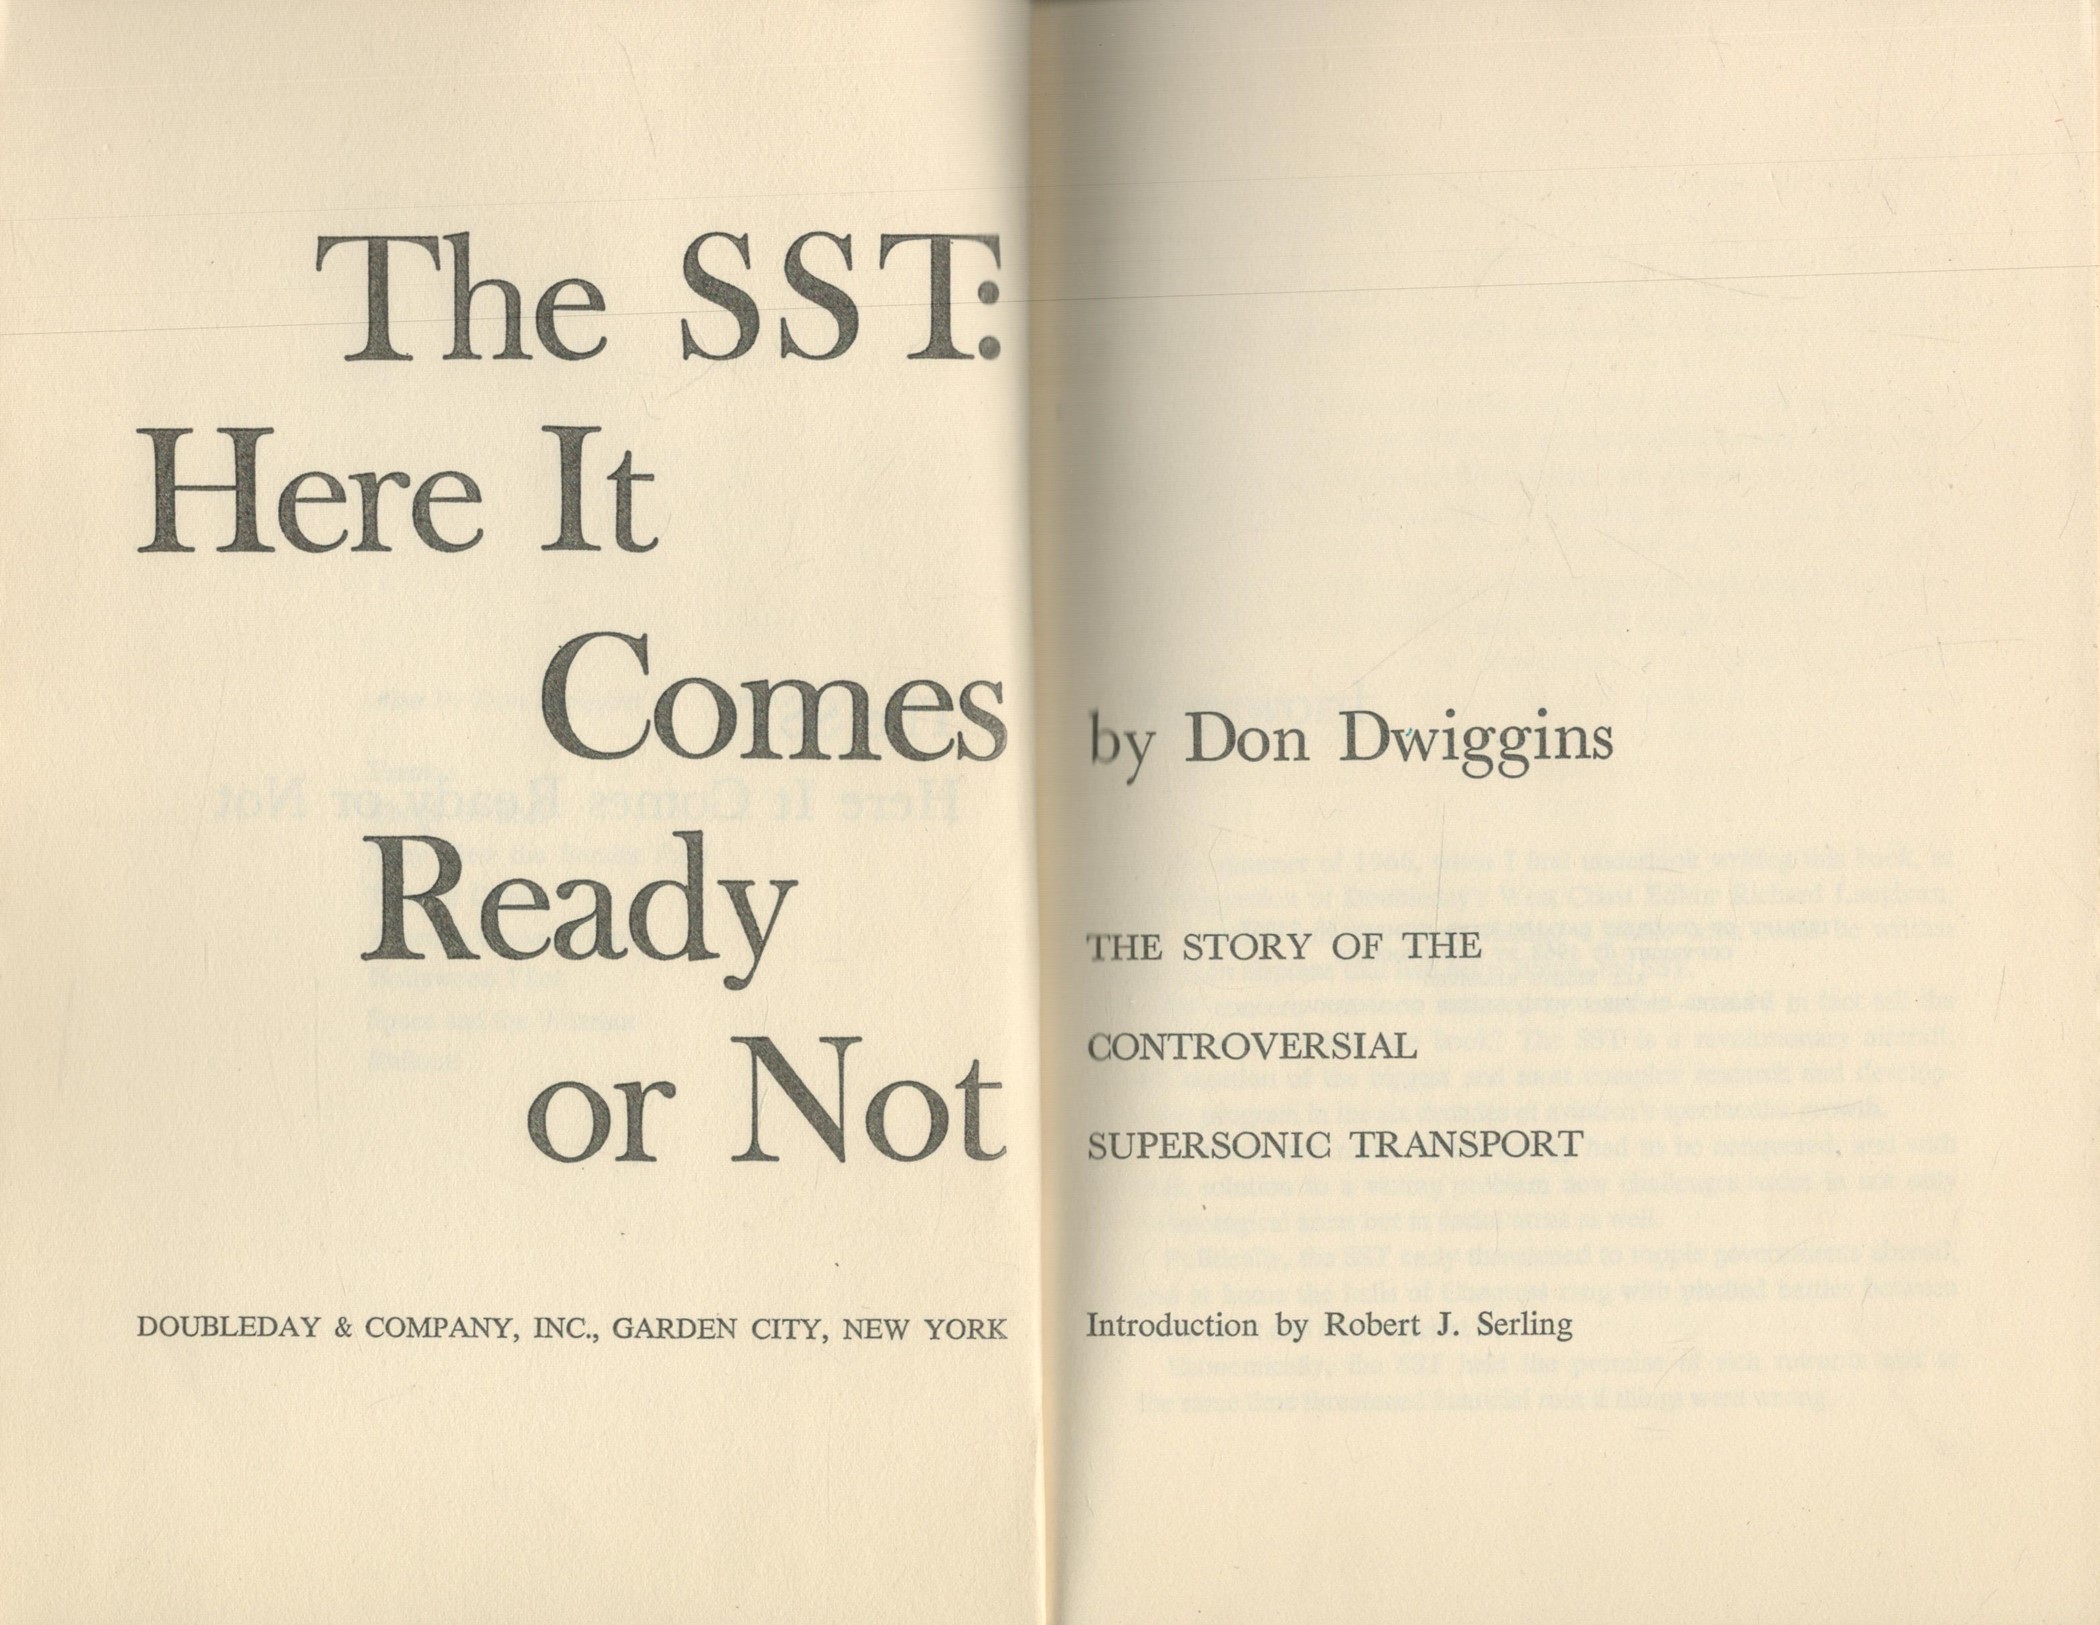 Aviation hardback book titled The SST Here it Comes Ready or Not The Story of the Controversial - Image 2 of 3